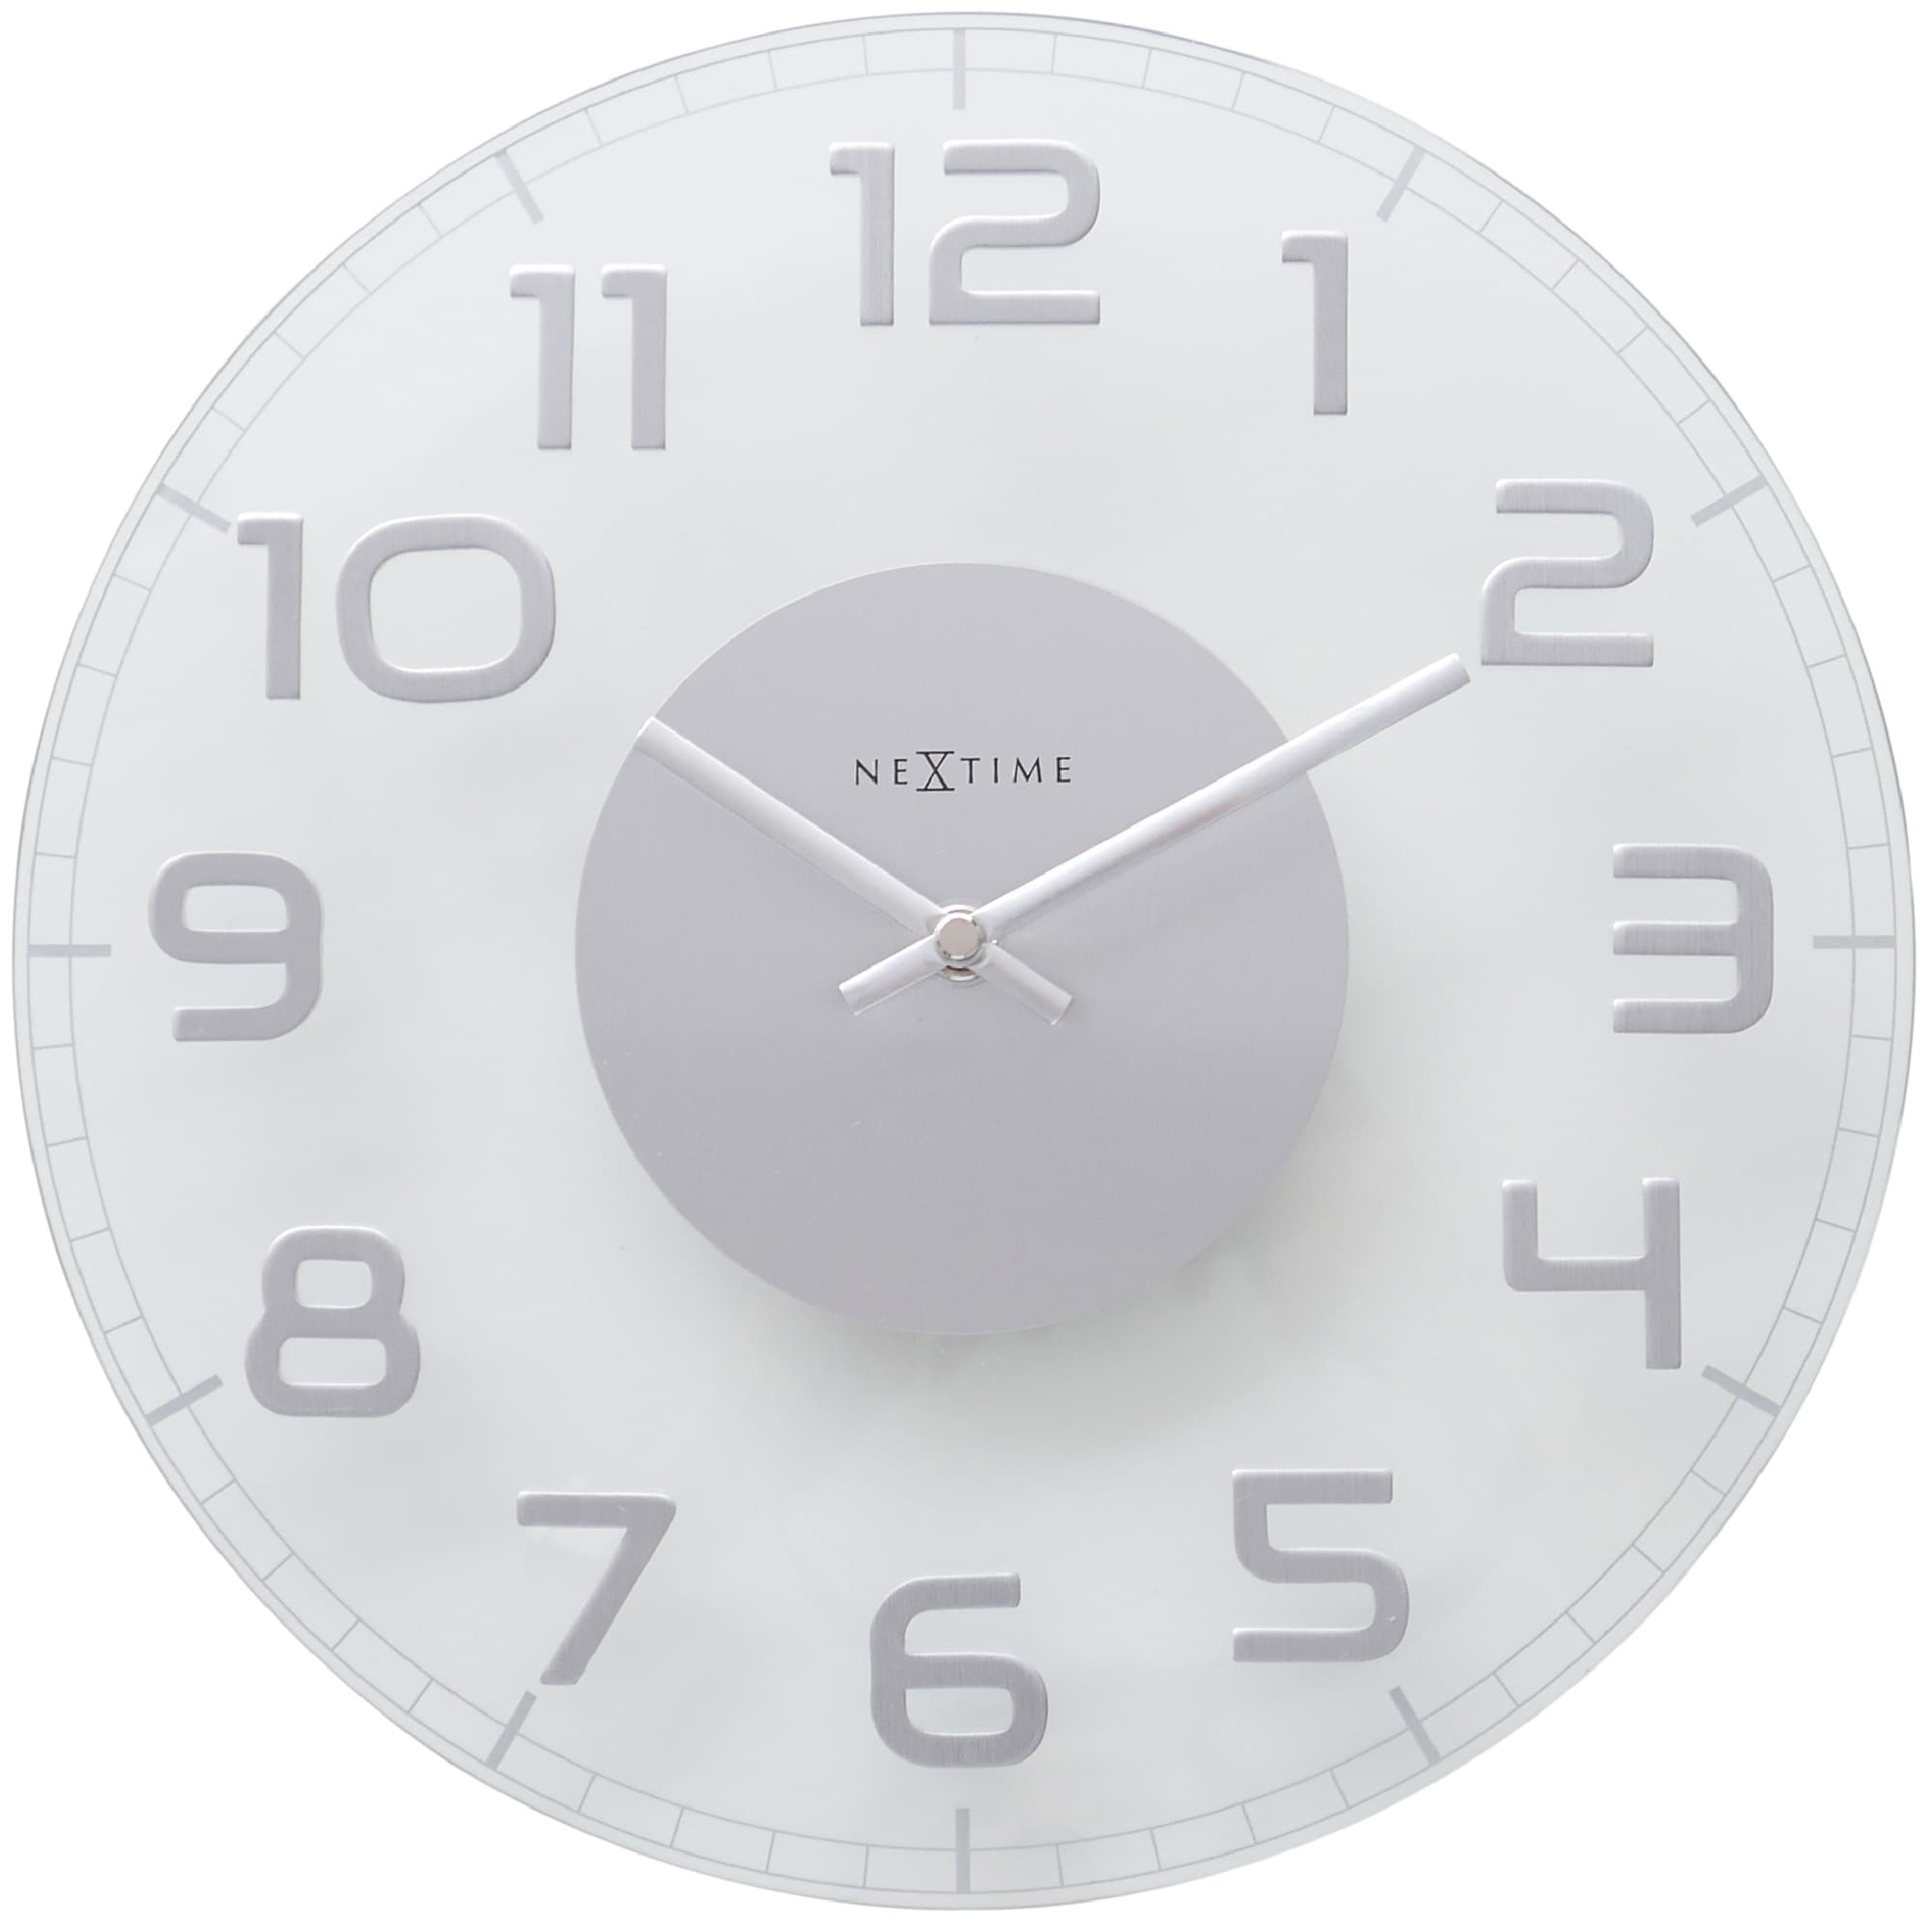 NeXtime Classy Round Wall Clock - On Sale - Bed Bath & Beyond - 32524561